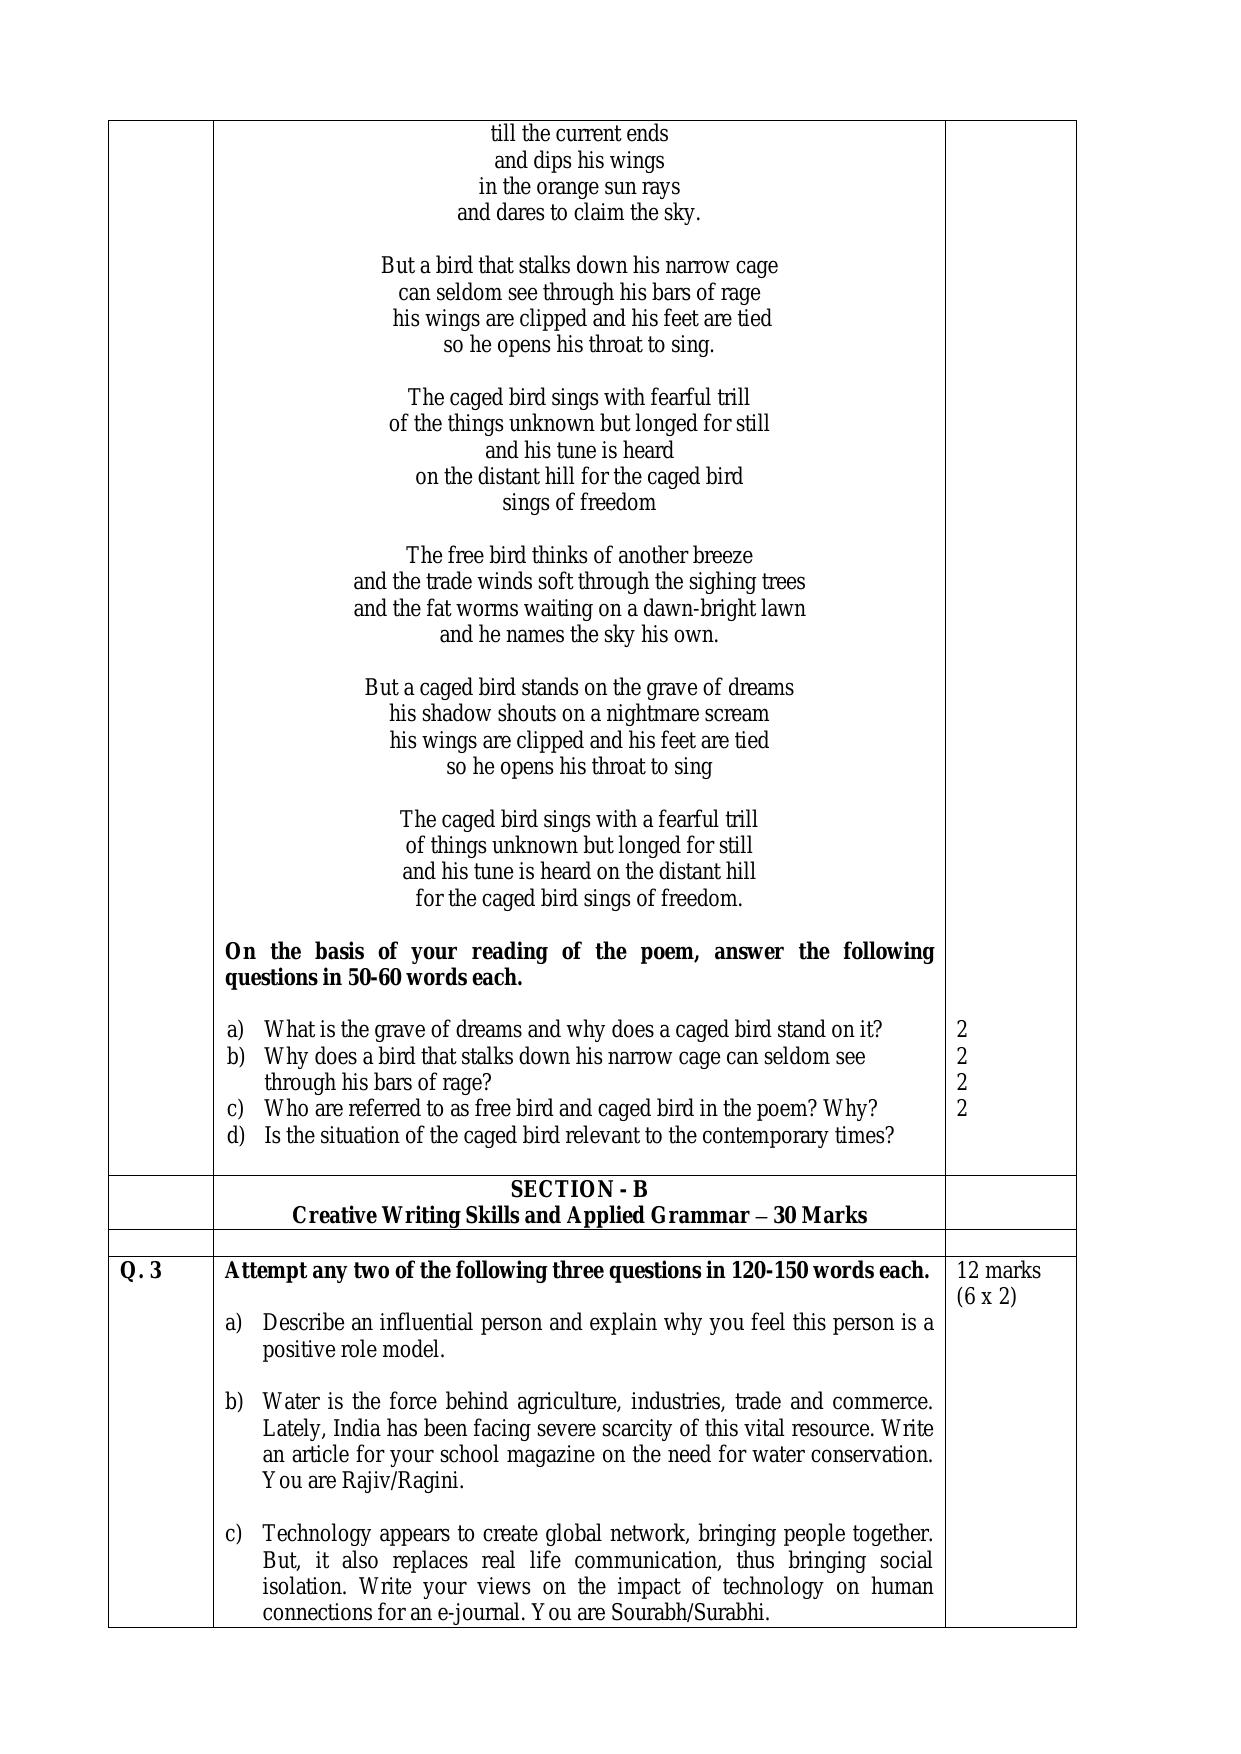 CBSE Class 12 English Elective Skill Education-Sample Paper 2019-20 - Page 4